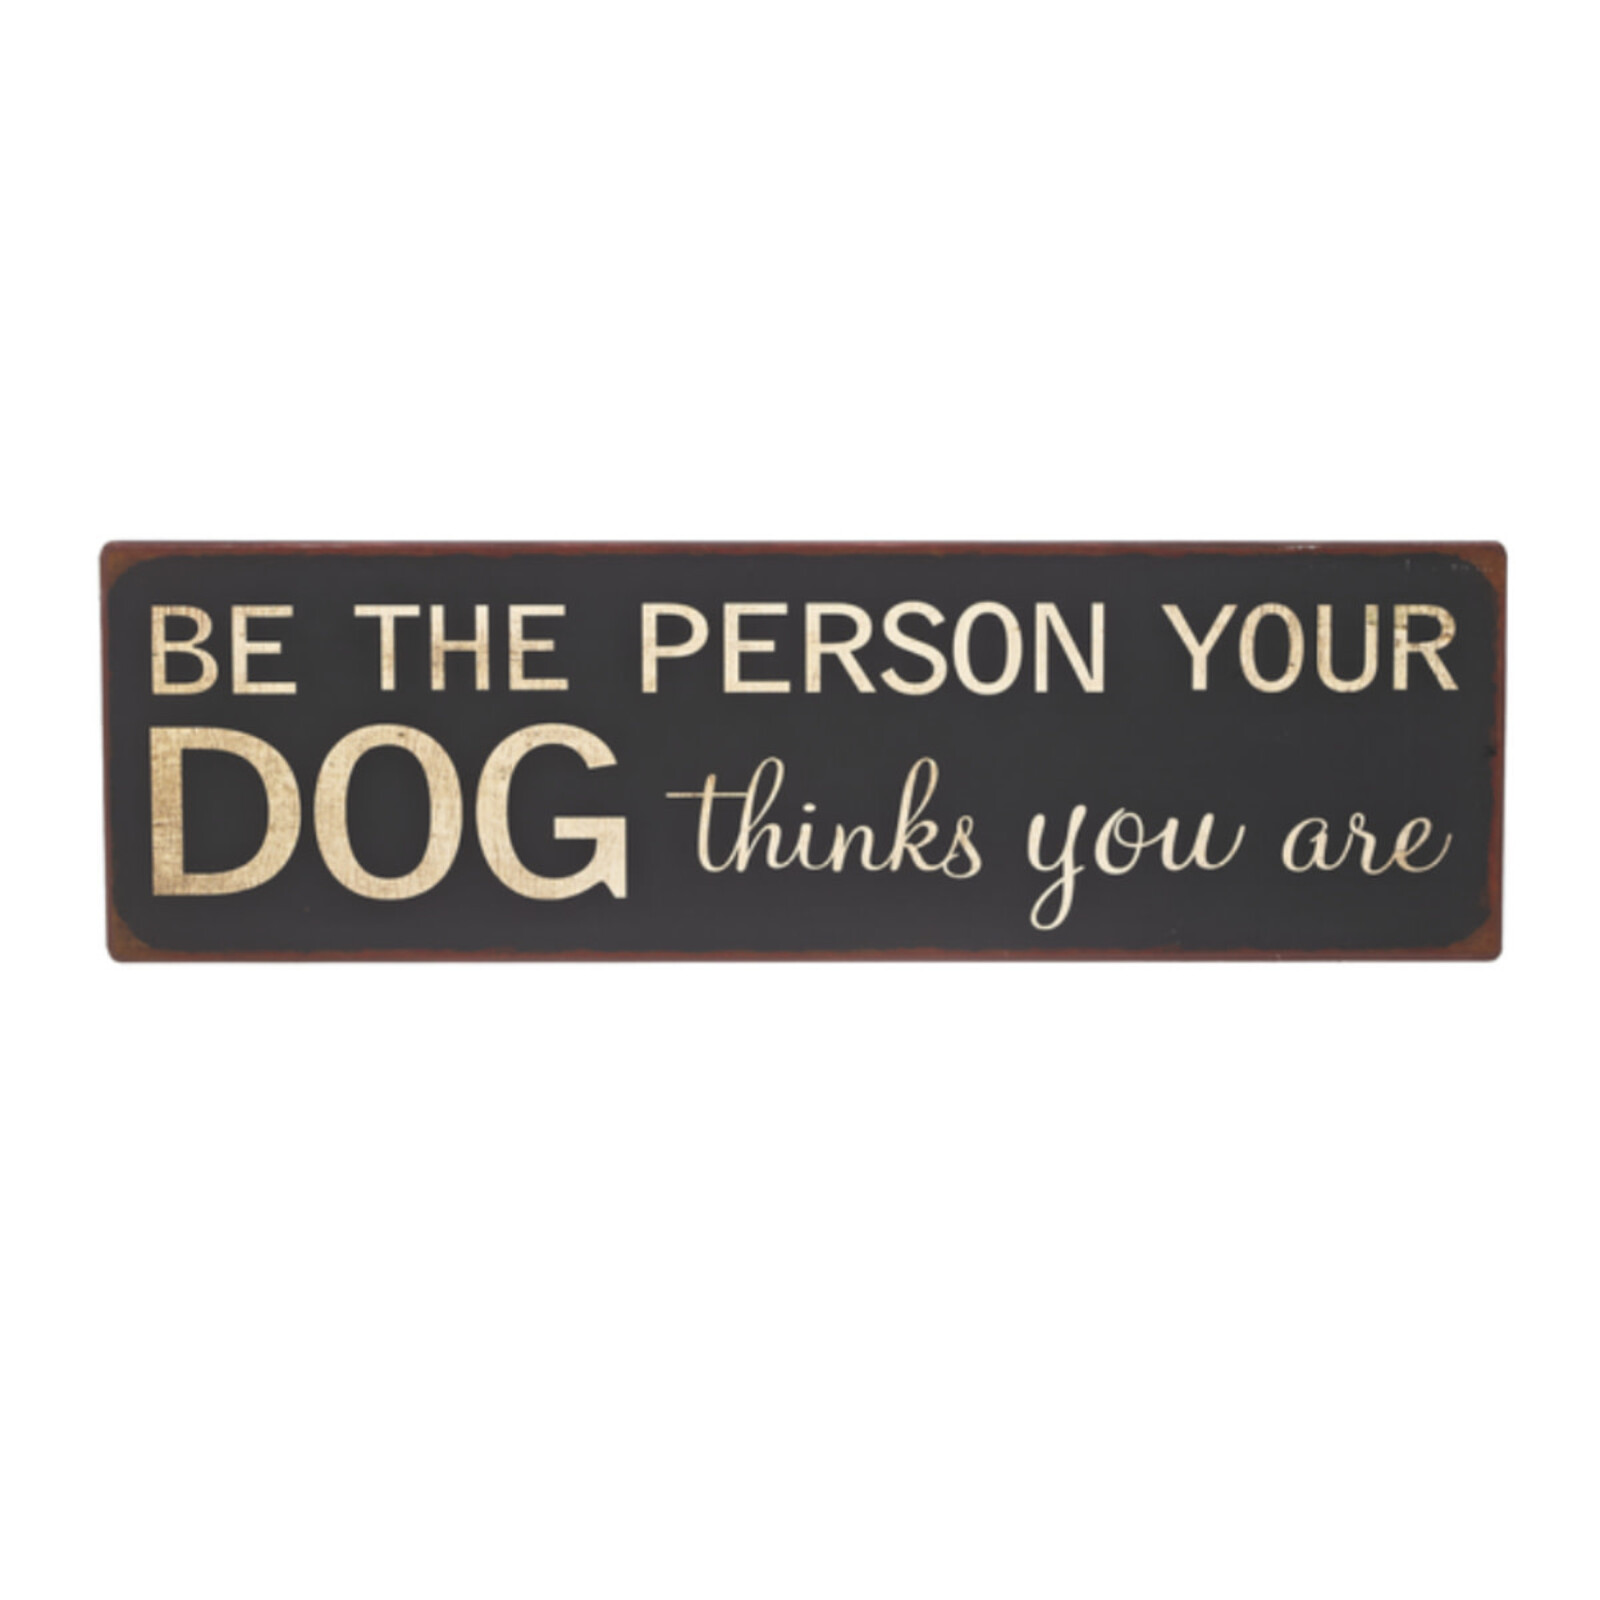 Ganz Plaque - Be the person your dog thinks you are   ER31934 loading=